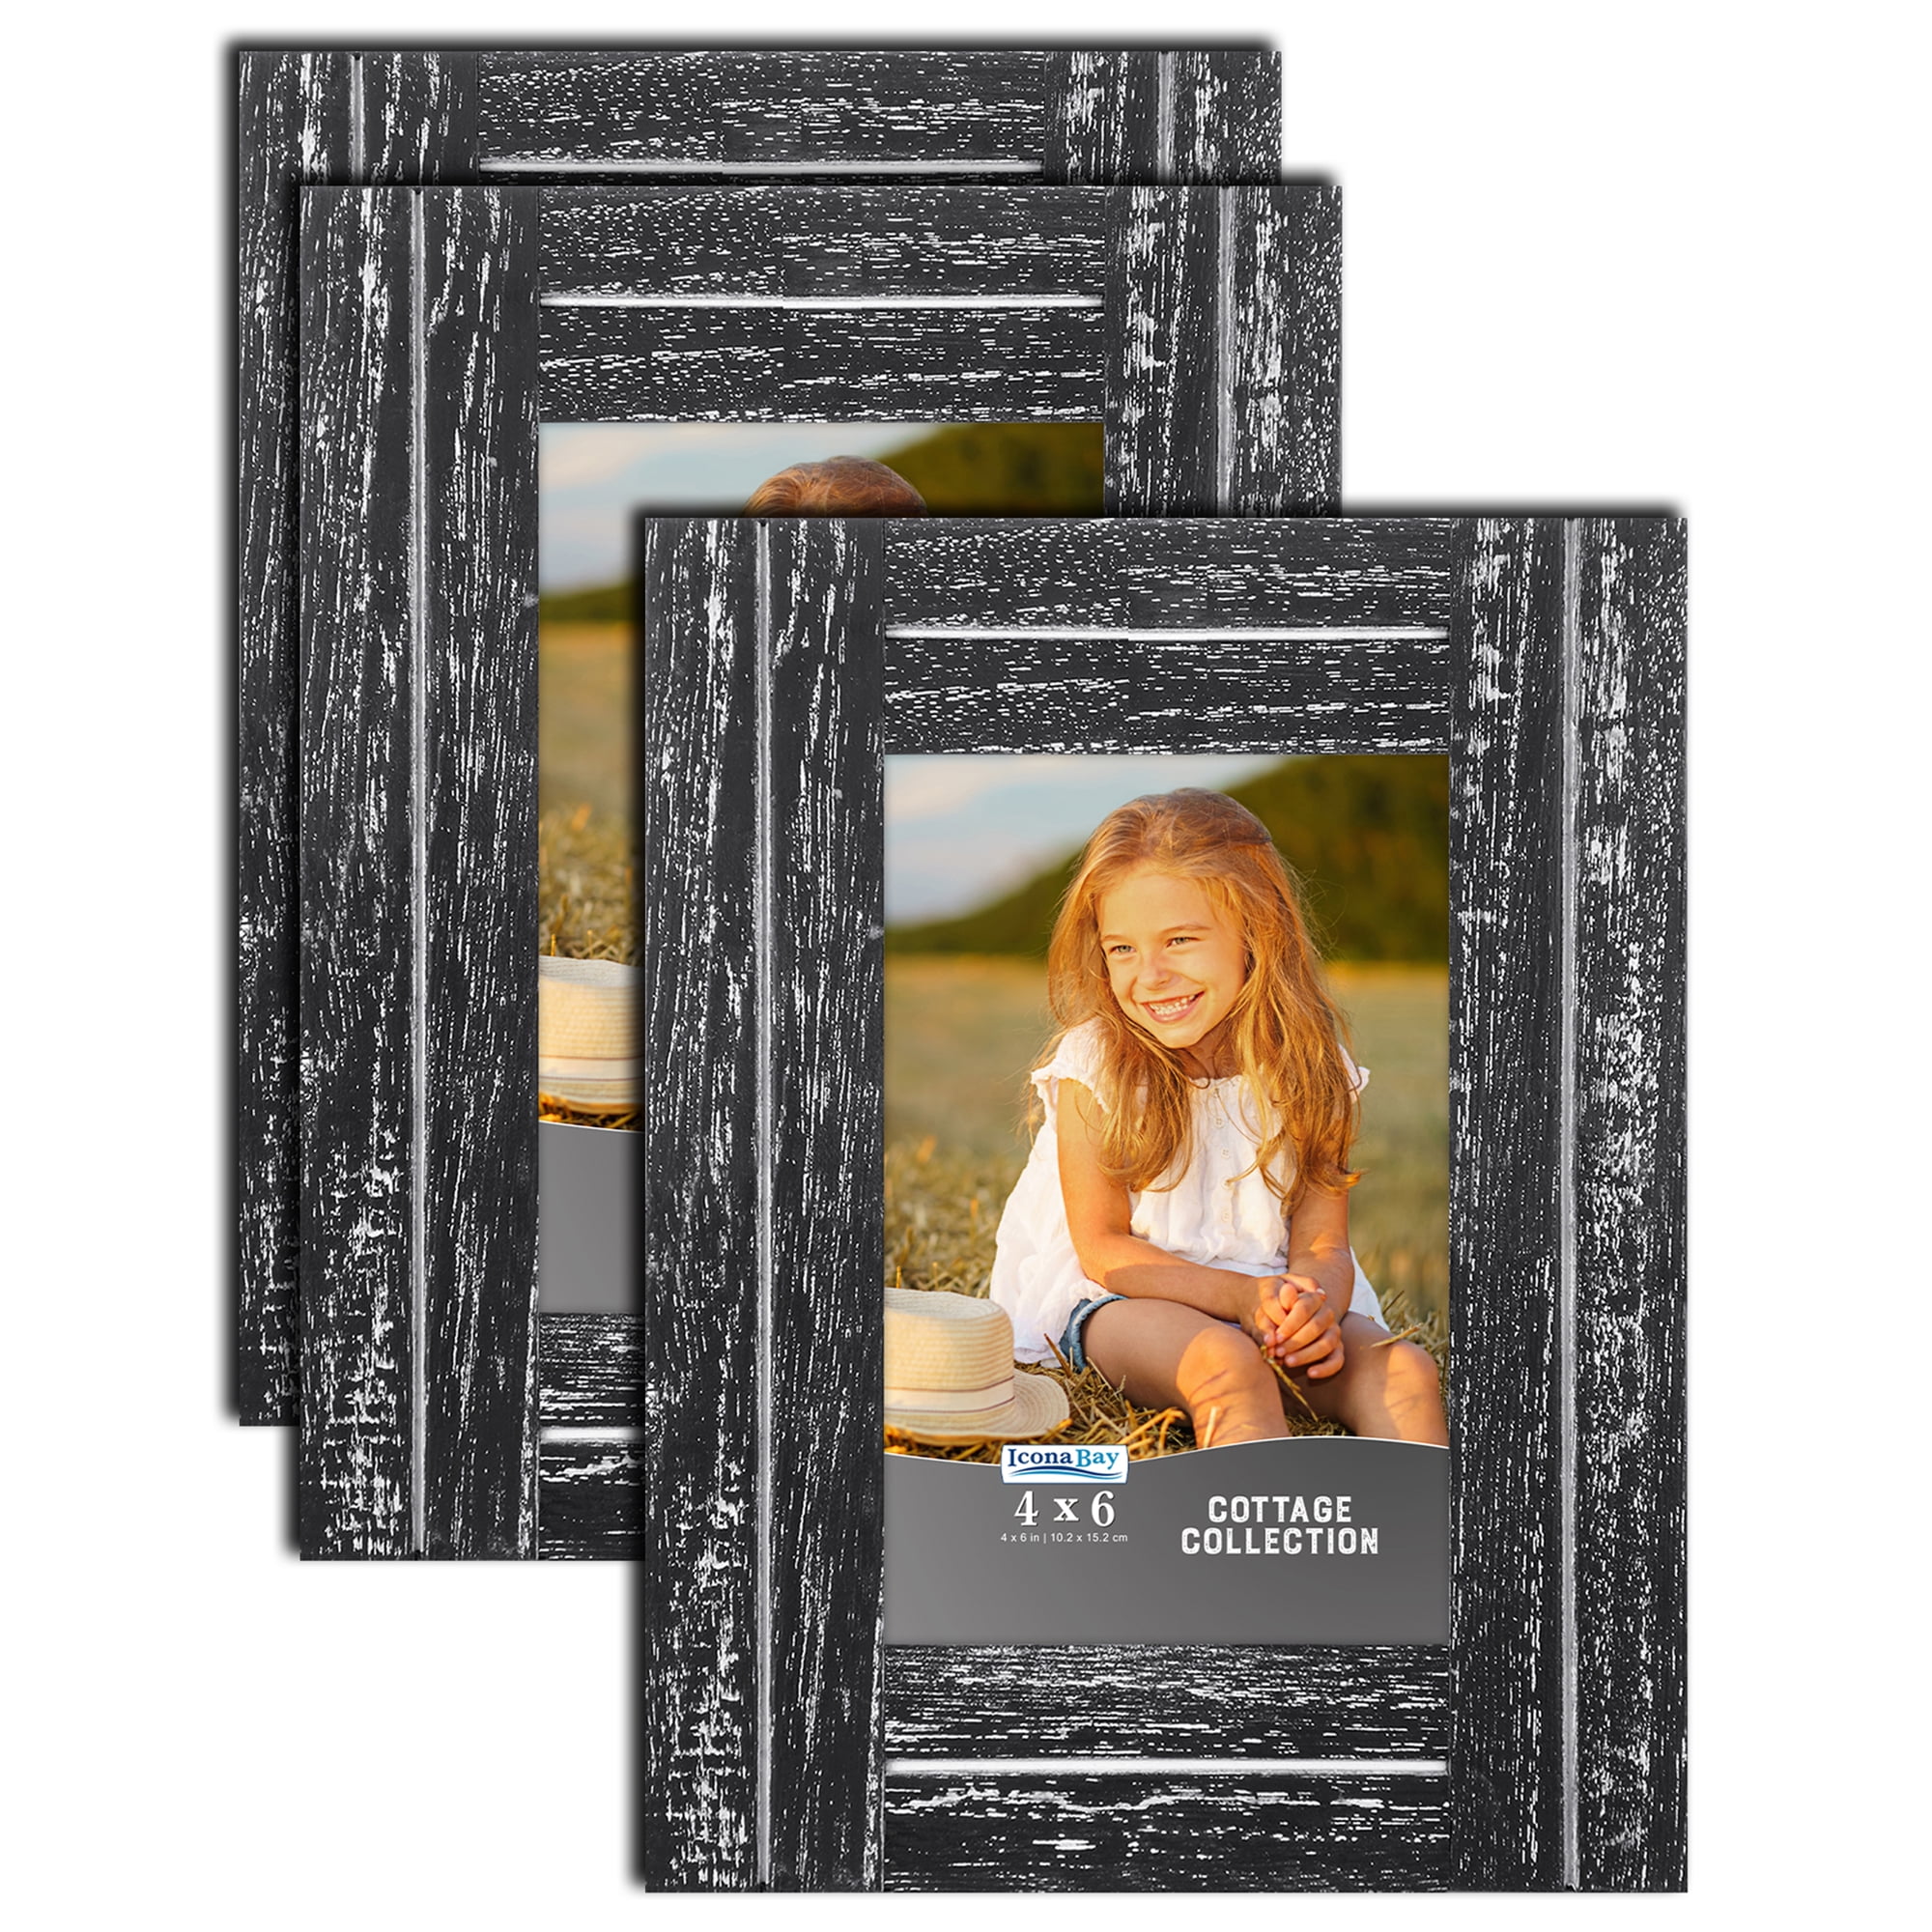 Icona Bay 8x10 Picture Frames Tuscan Gray, 3 Pack Milan Collection Table Top or Wall Mount Modern Farmhouse Style Includes Mat for 5x7 Photo 